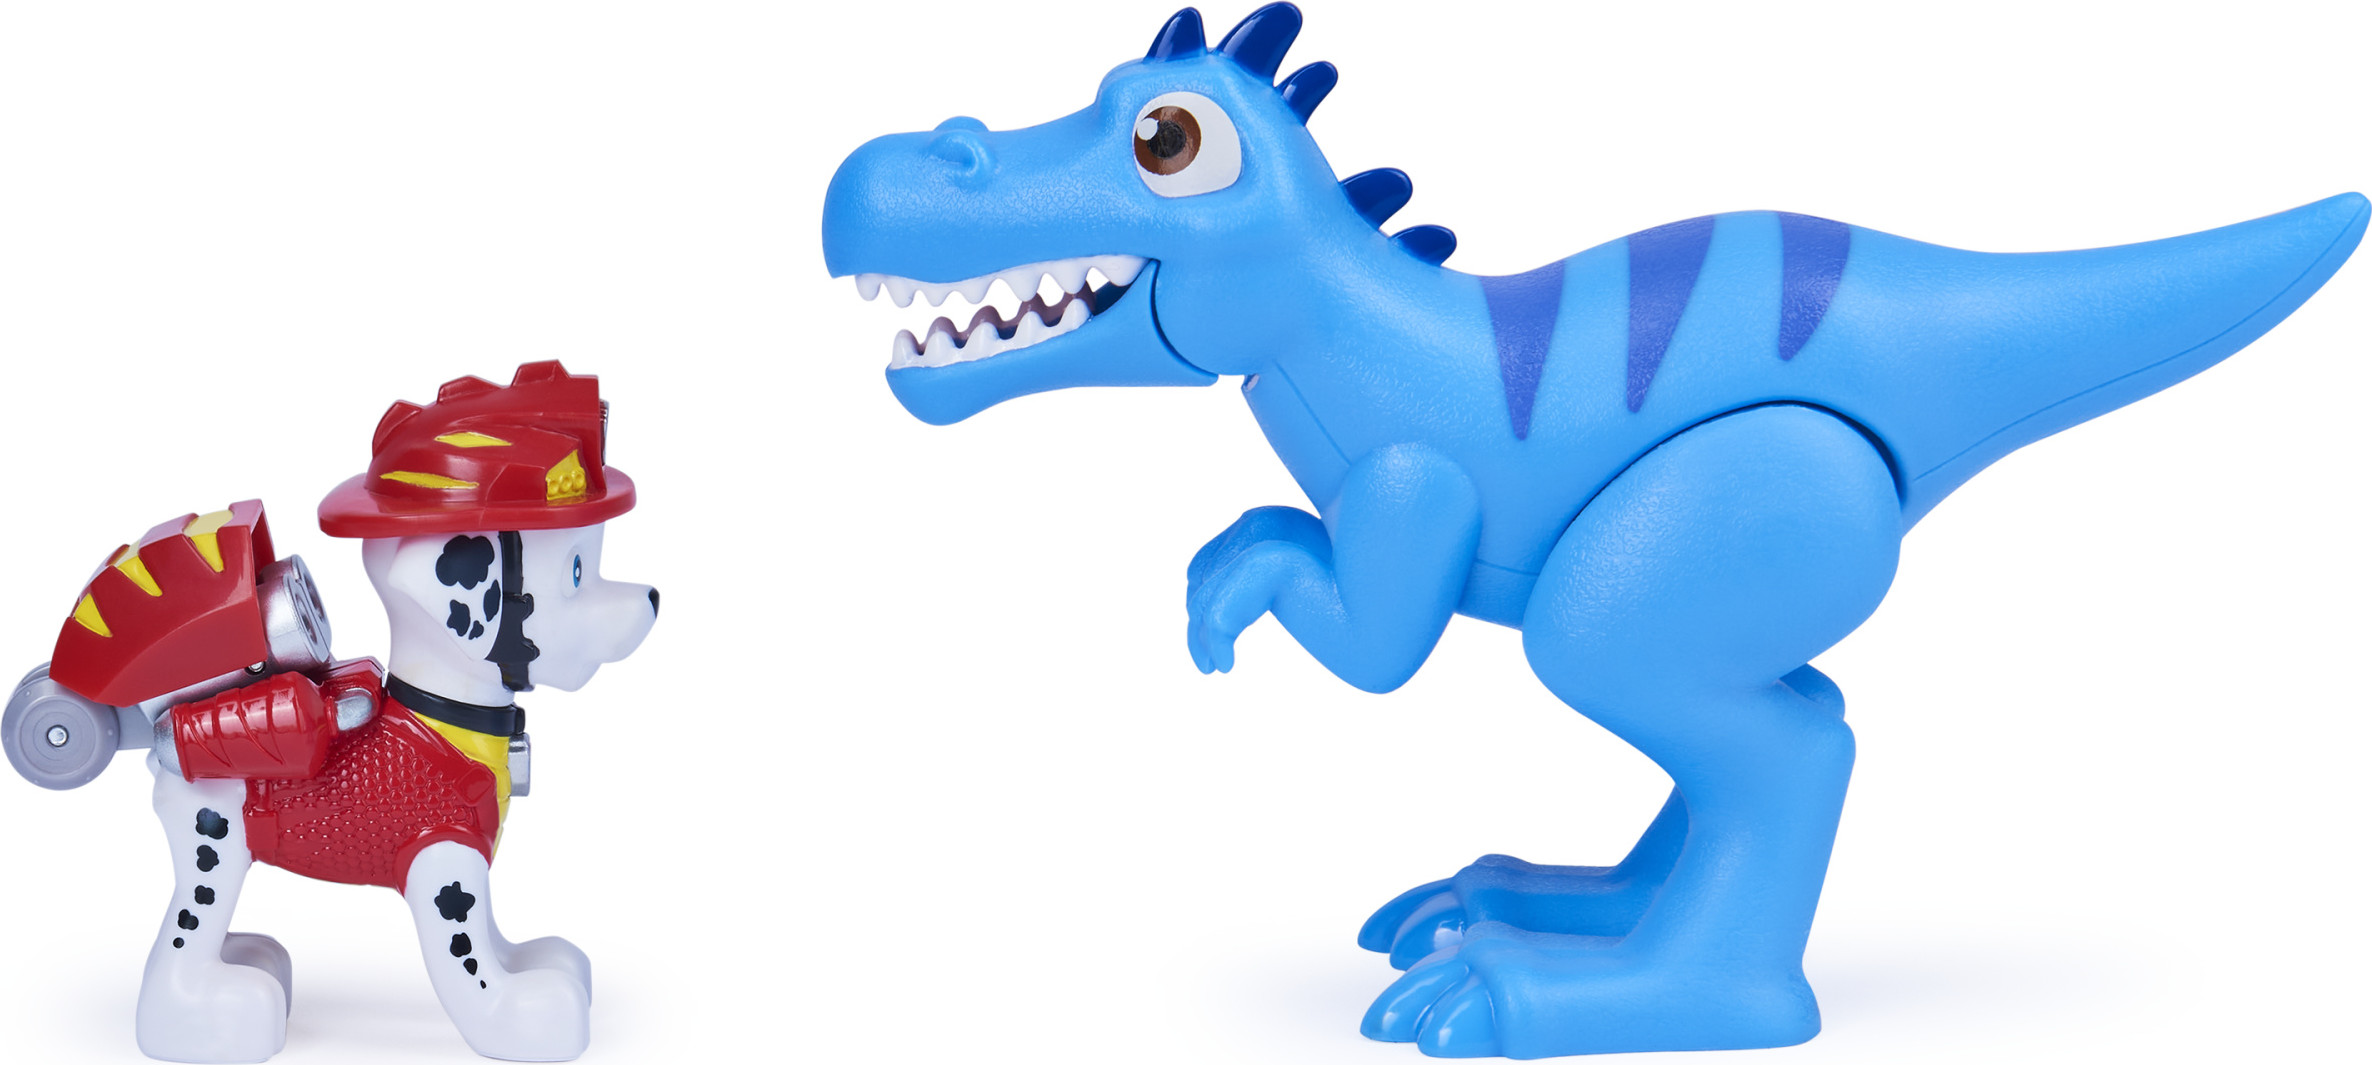 PAW Patrol, Dino Rescue Marshall and Dinosaur Action Figure Set, for Kids Aged 3 and up - image 4 of 5